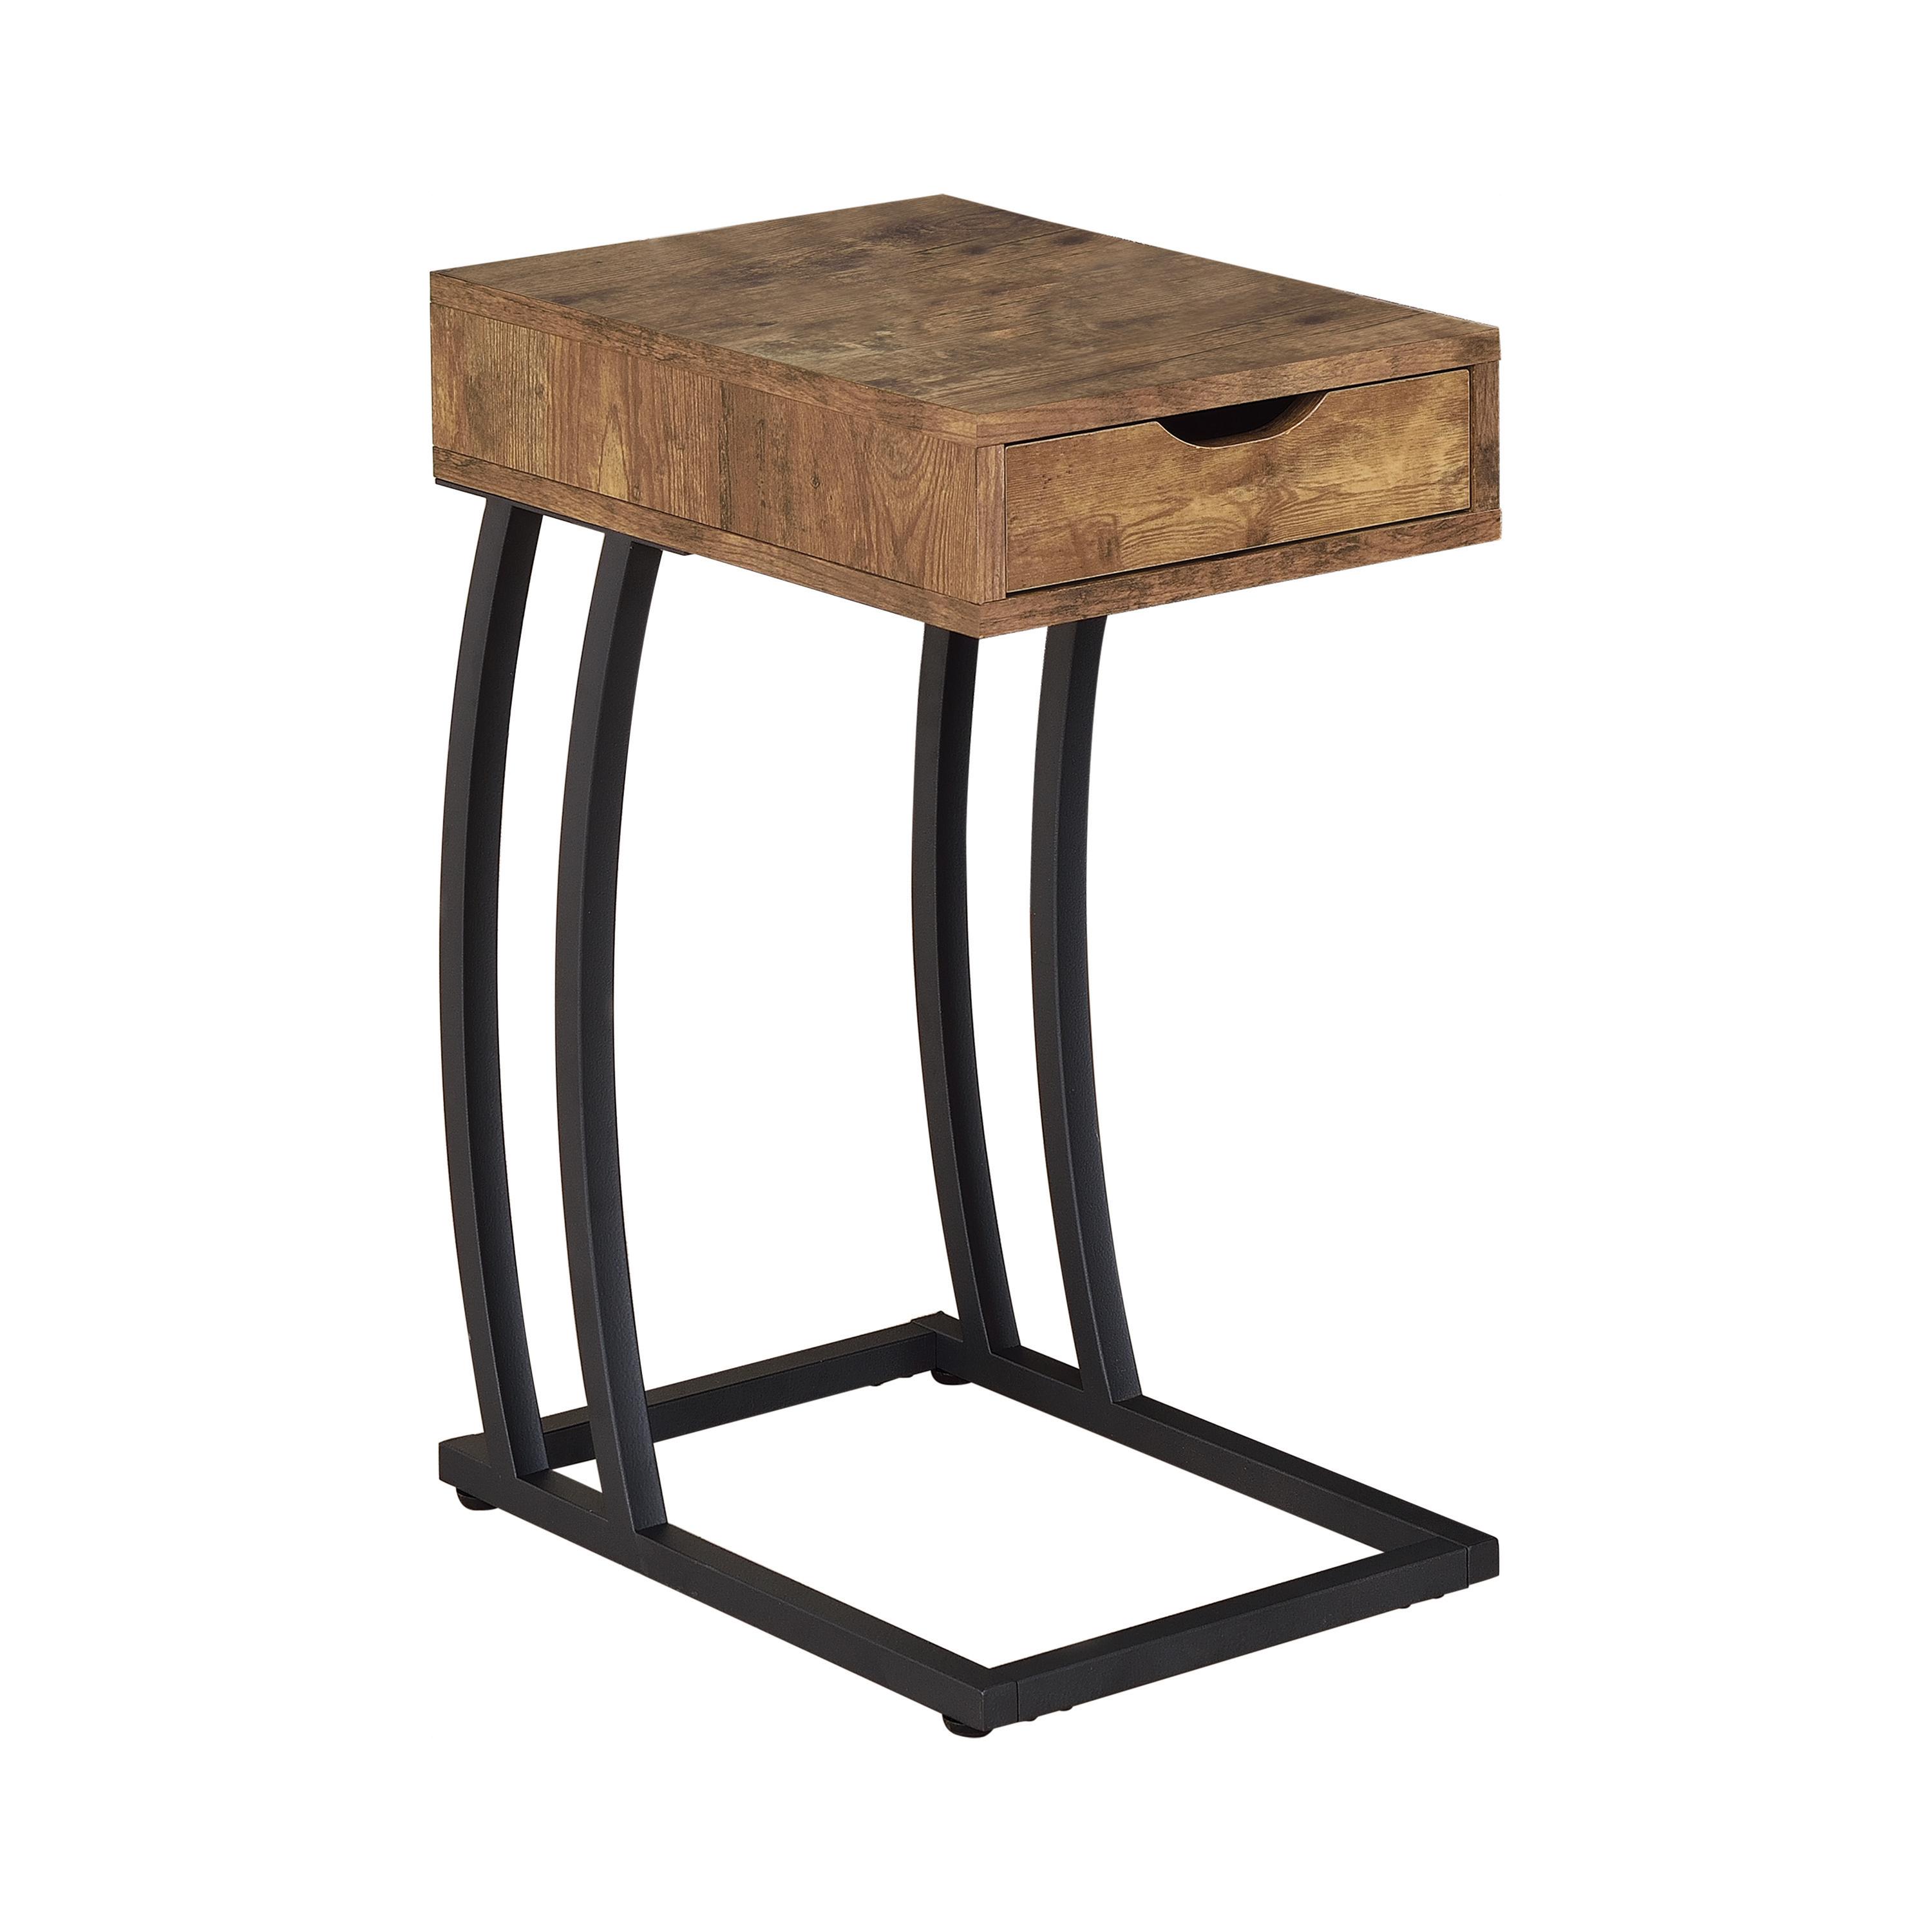 Transitional Accent Table 900577 900577 in Nutmeg 